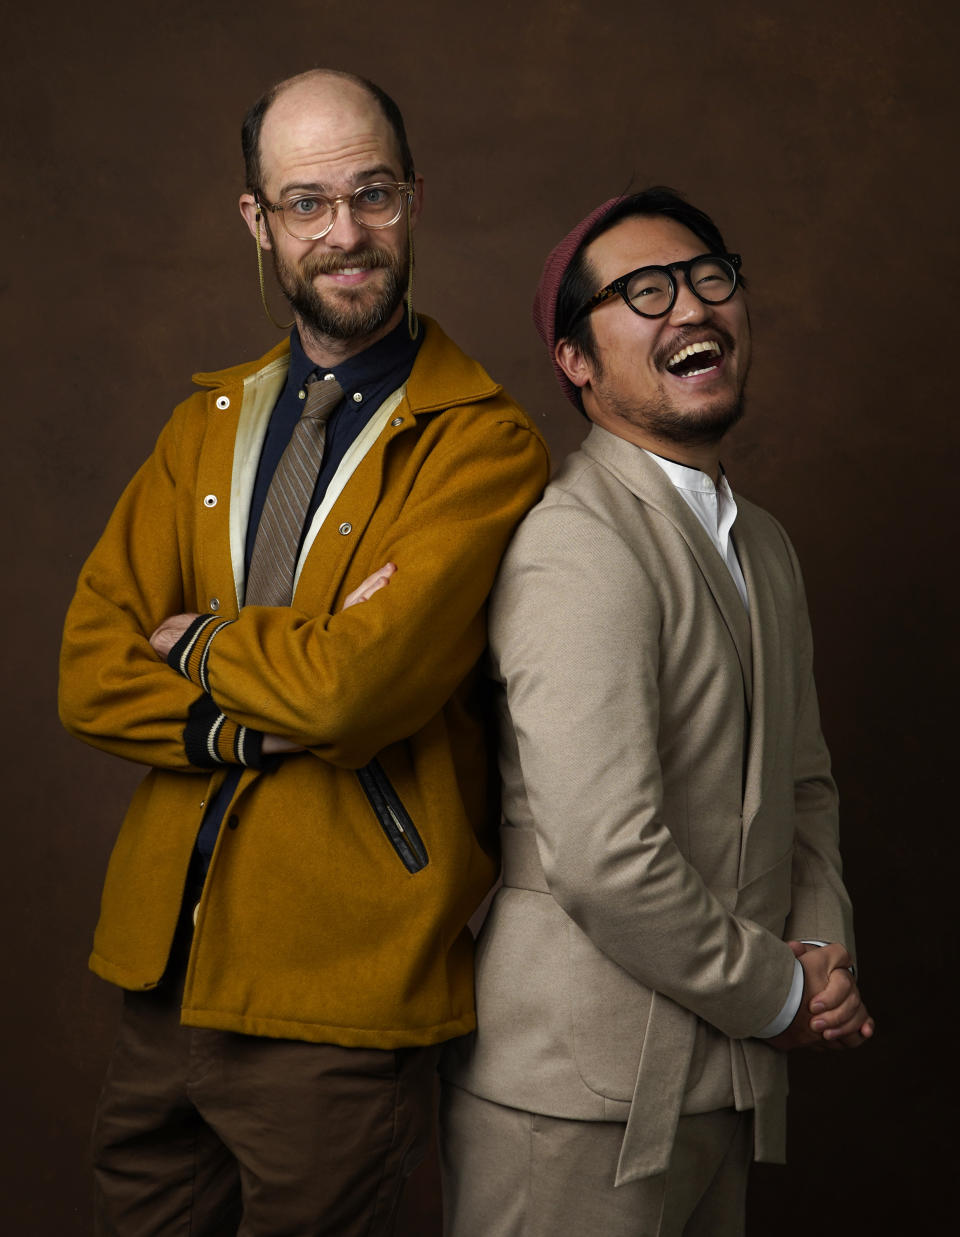 FILE - Daniel Scheinert, left, and Daniel Kwan, the directing duo known as the Daniels, pose for a portrait at the 95th Academy Awards Nominees Luncheon on Monday, Feb. 13, 2023, at the Beverly Hilton Hotel in Beverly Hills, Calif. (AP Photo/Chris Pizzello, File)